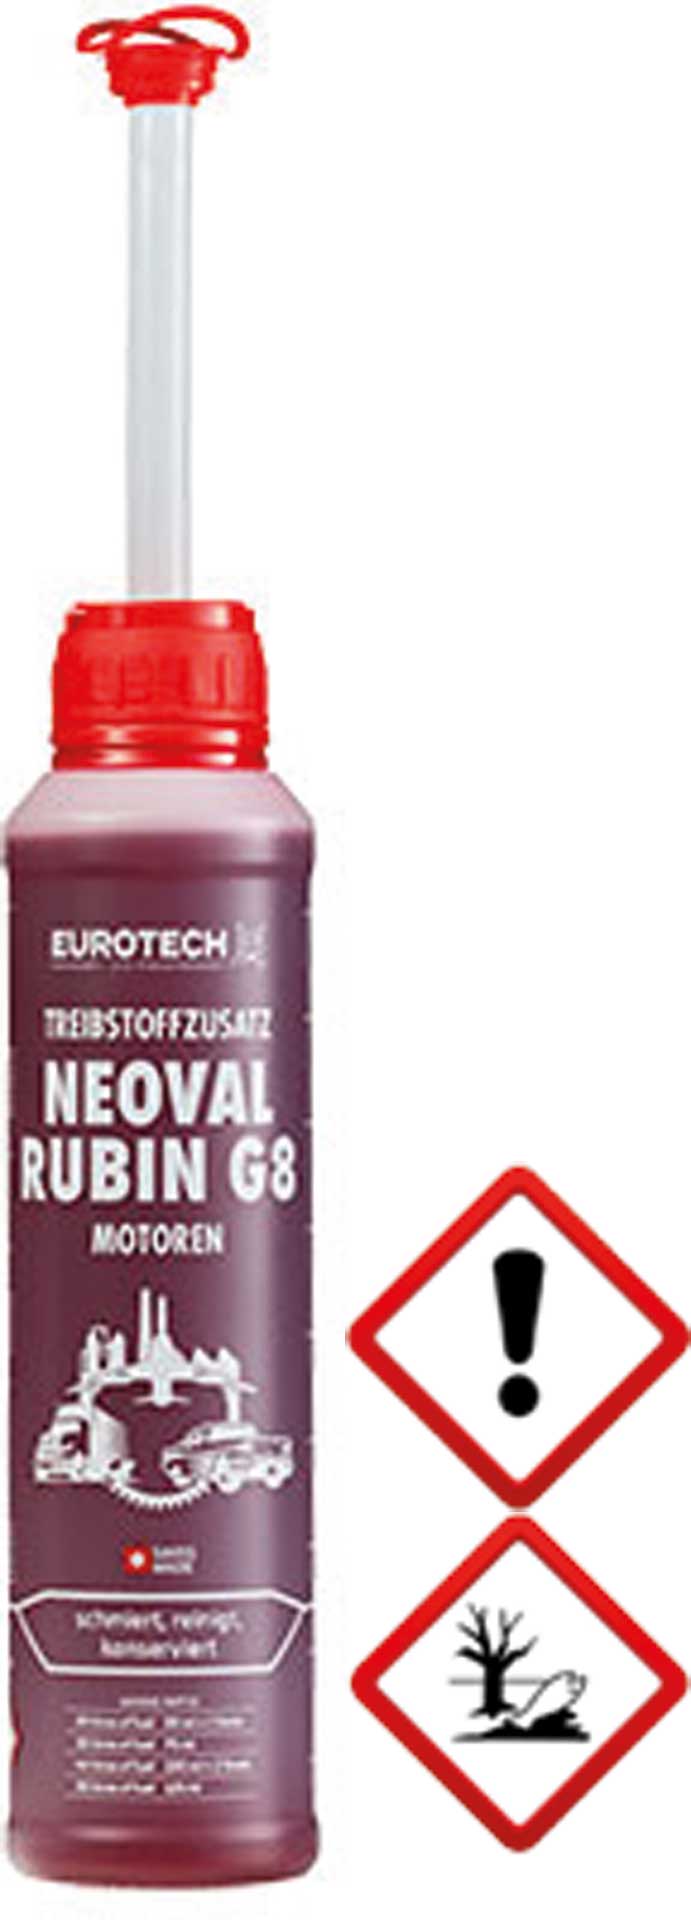 EUROTECH NEOVAL RUBY G8 ENGINE 500ML BOTTLE